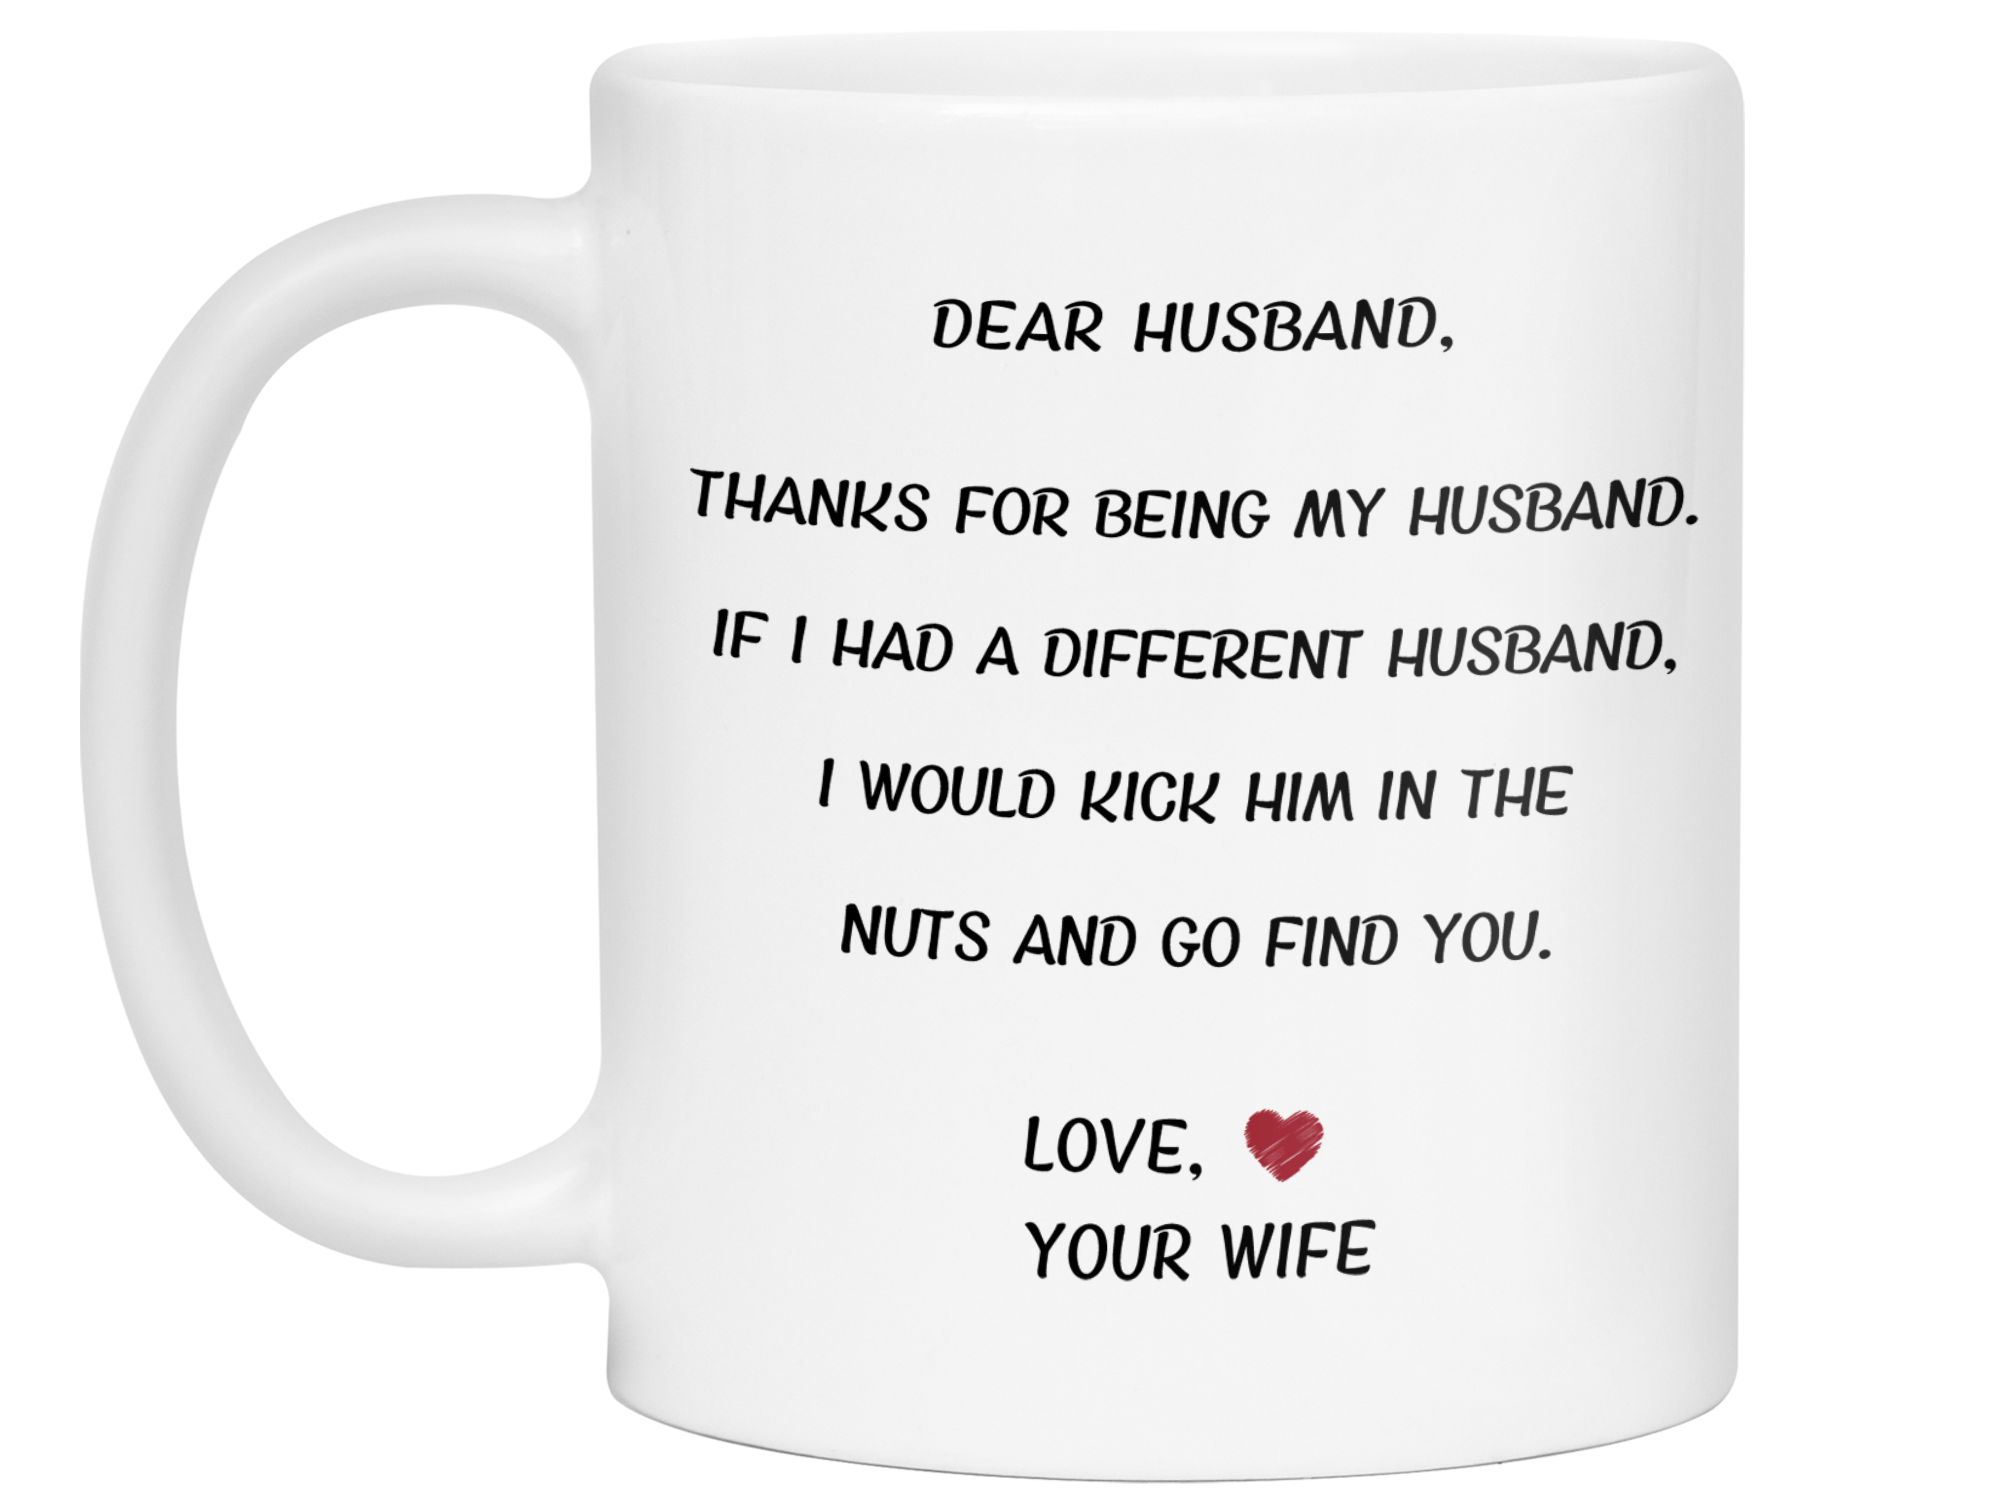 Valentine's day wife gift - thanks for being my wife mug gift from husband  | eBay